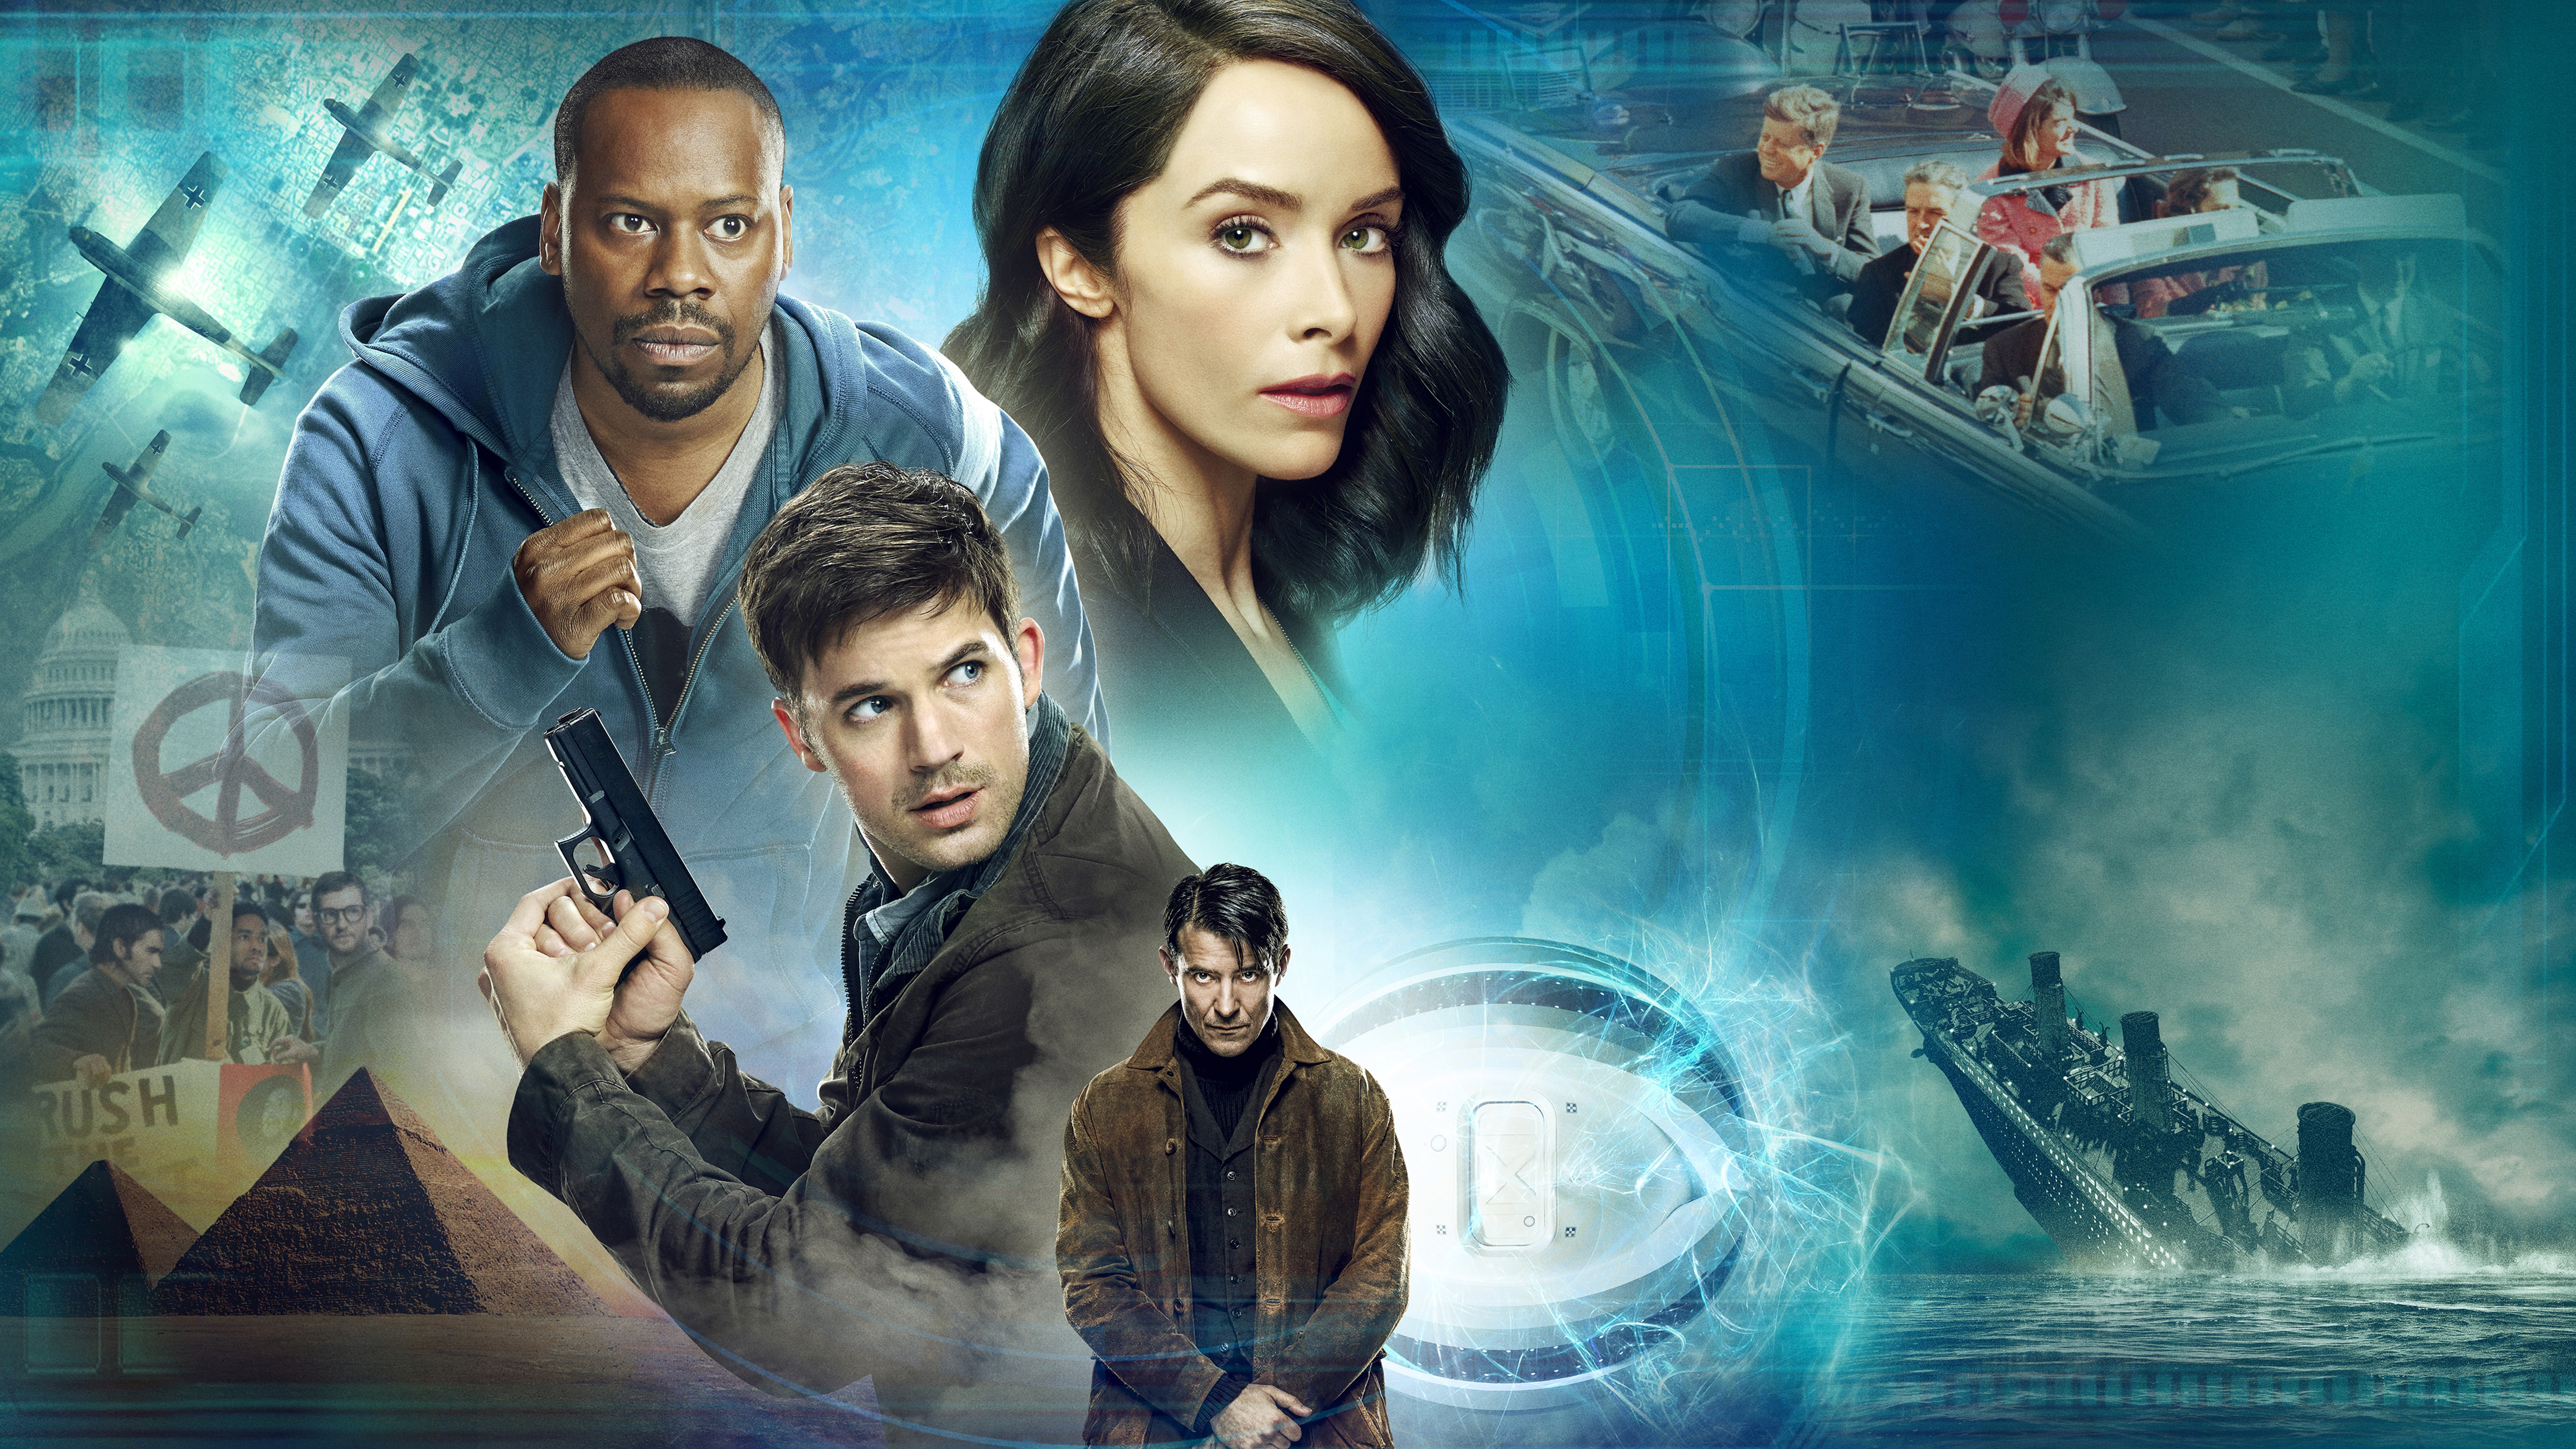 TV Show Timeless HD Wallpaper | Background Image